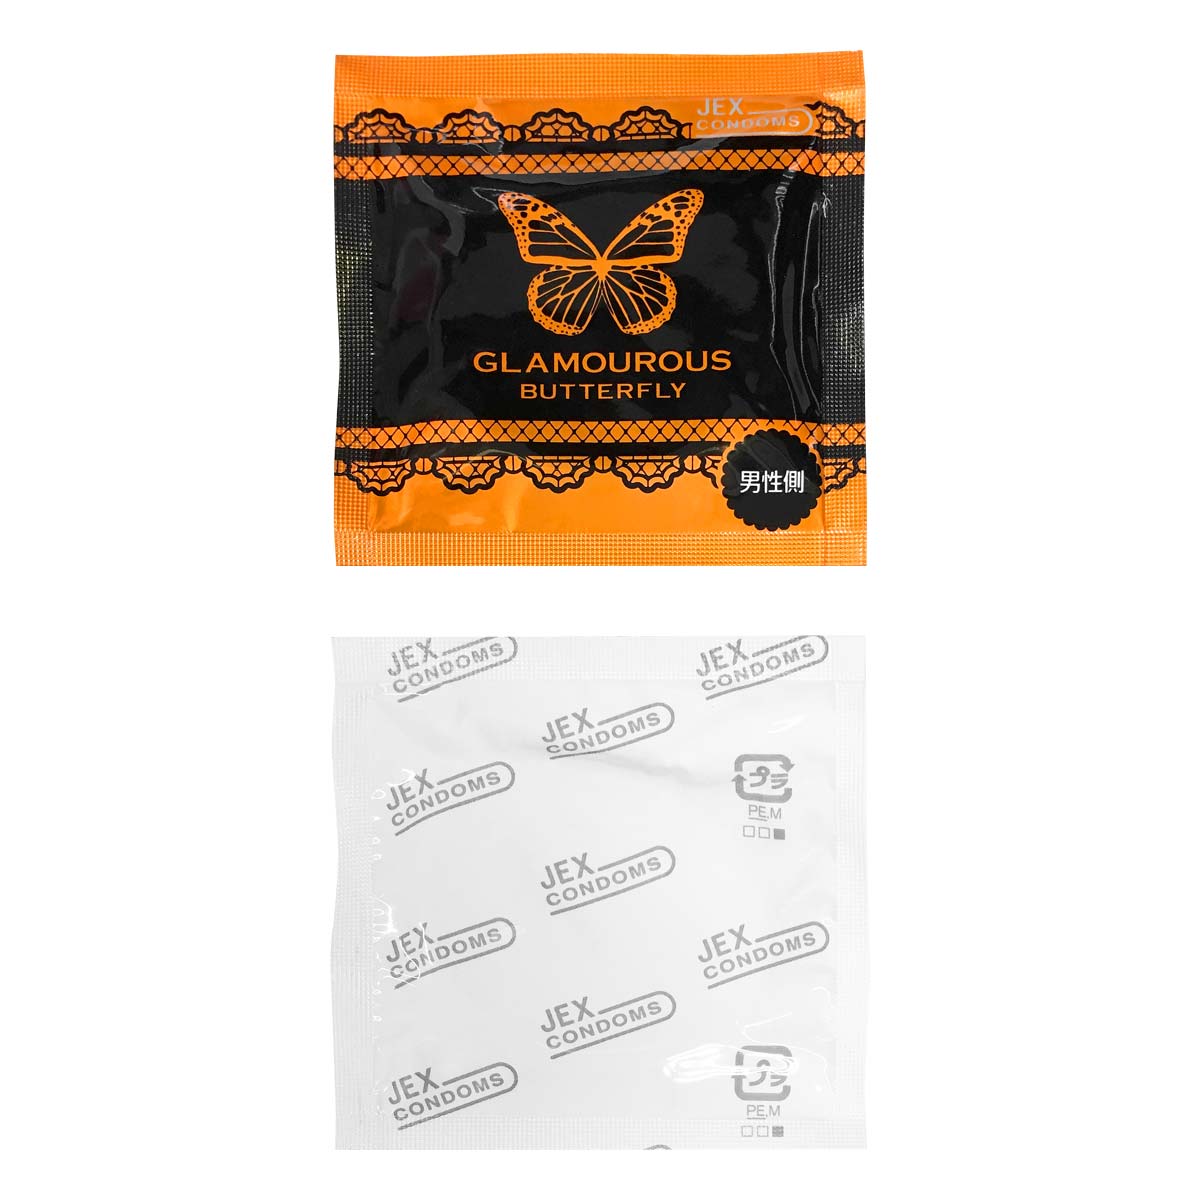 Glamourous Butterfly Large Size 55mm 2 pieces Latex Condom-p_2